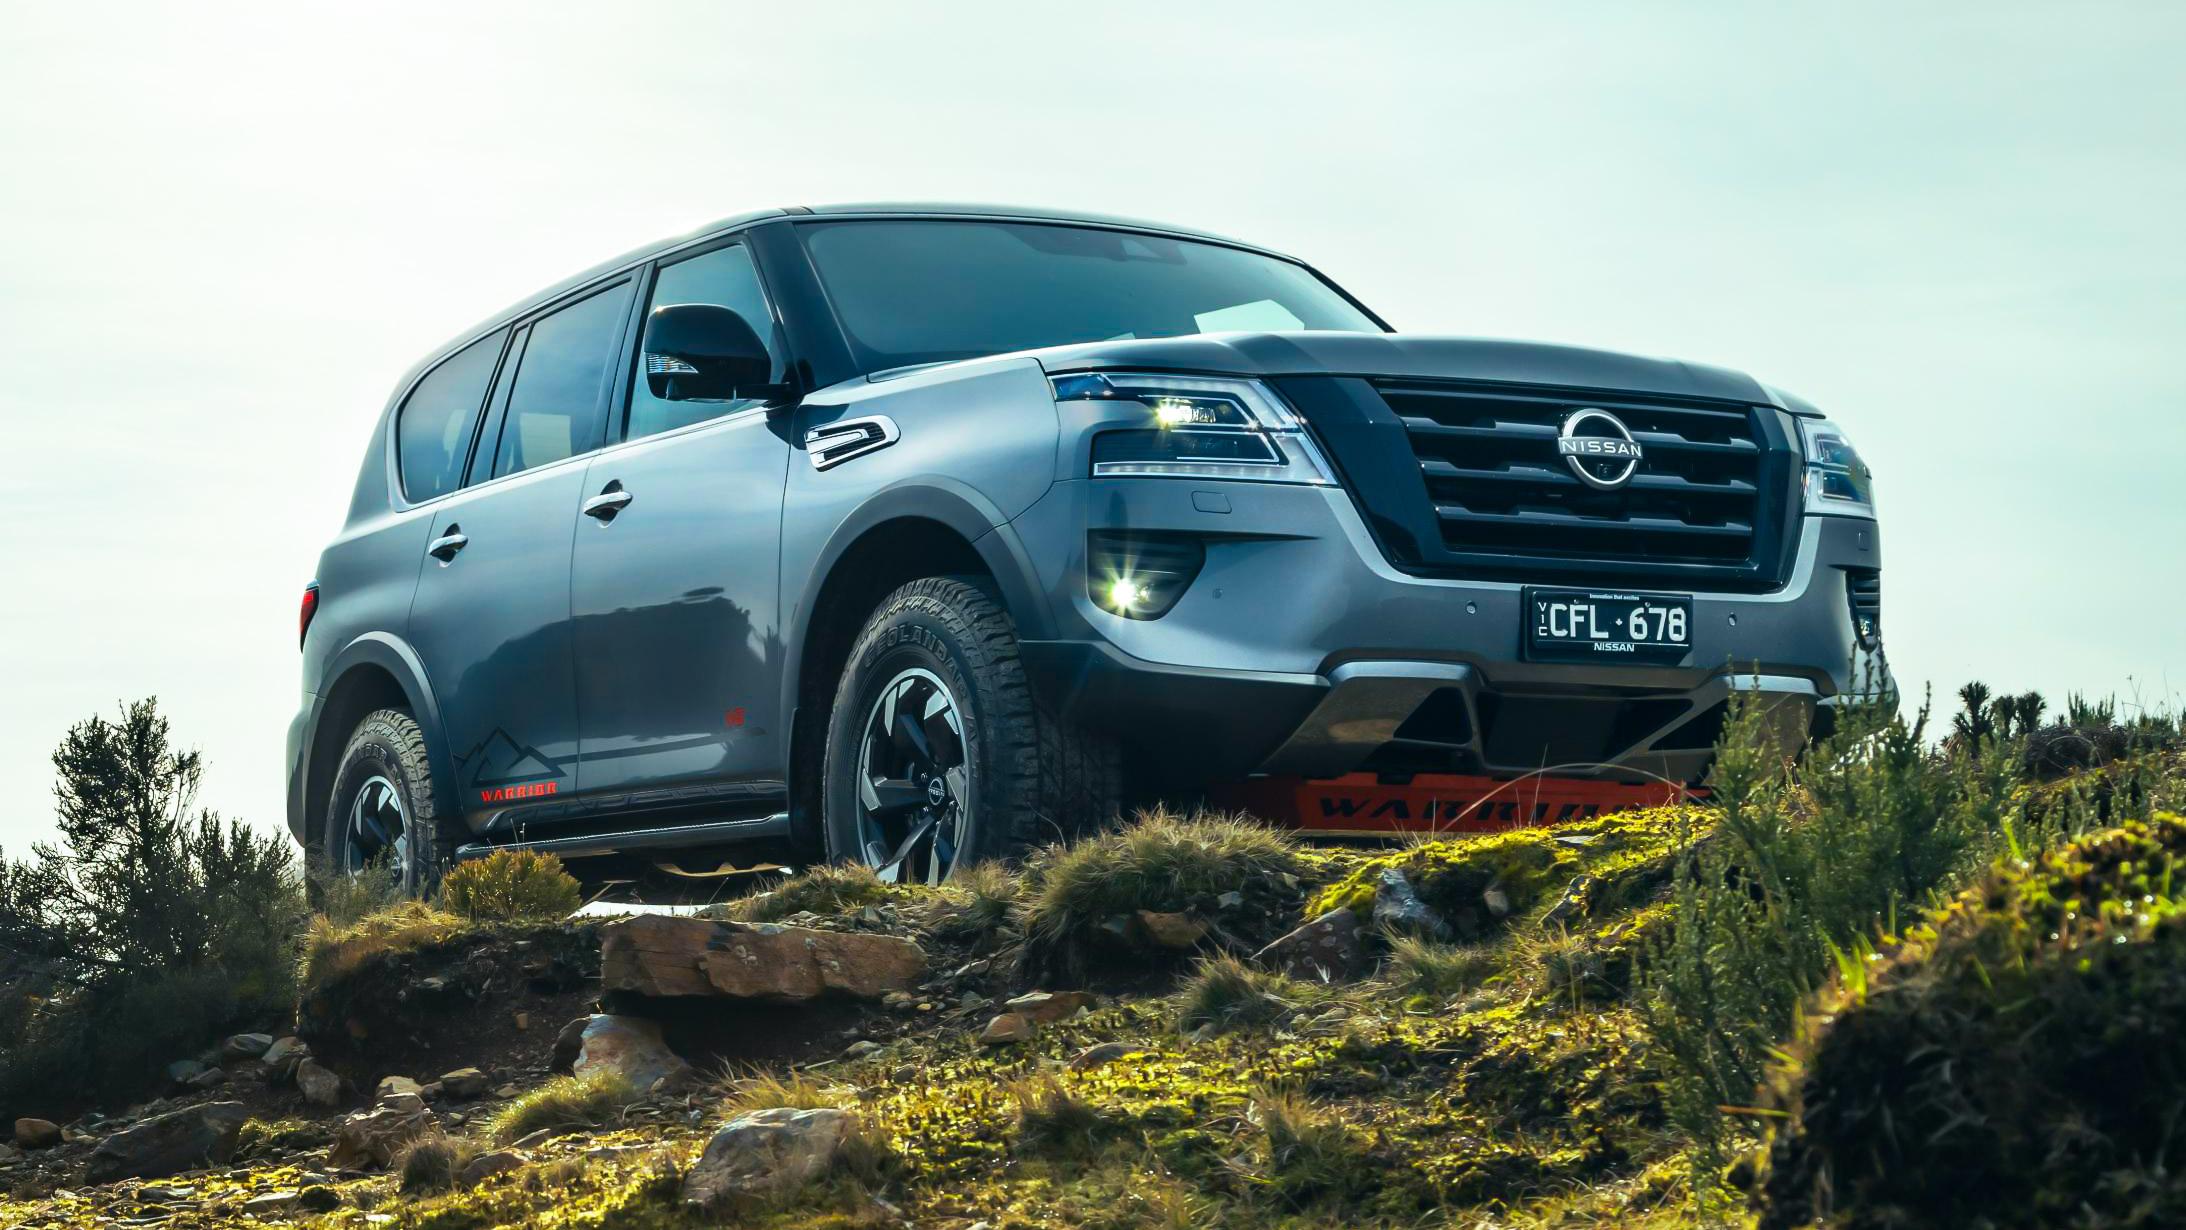 Nissan Patrol 2021 review: Is this big V8 4x4 a suitable family